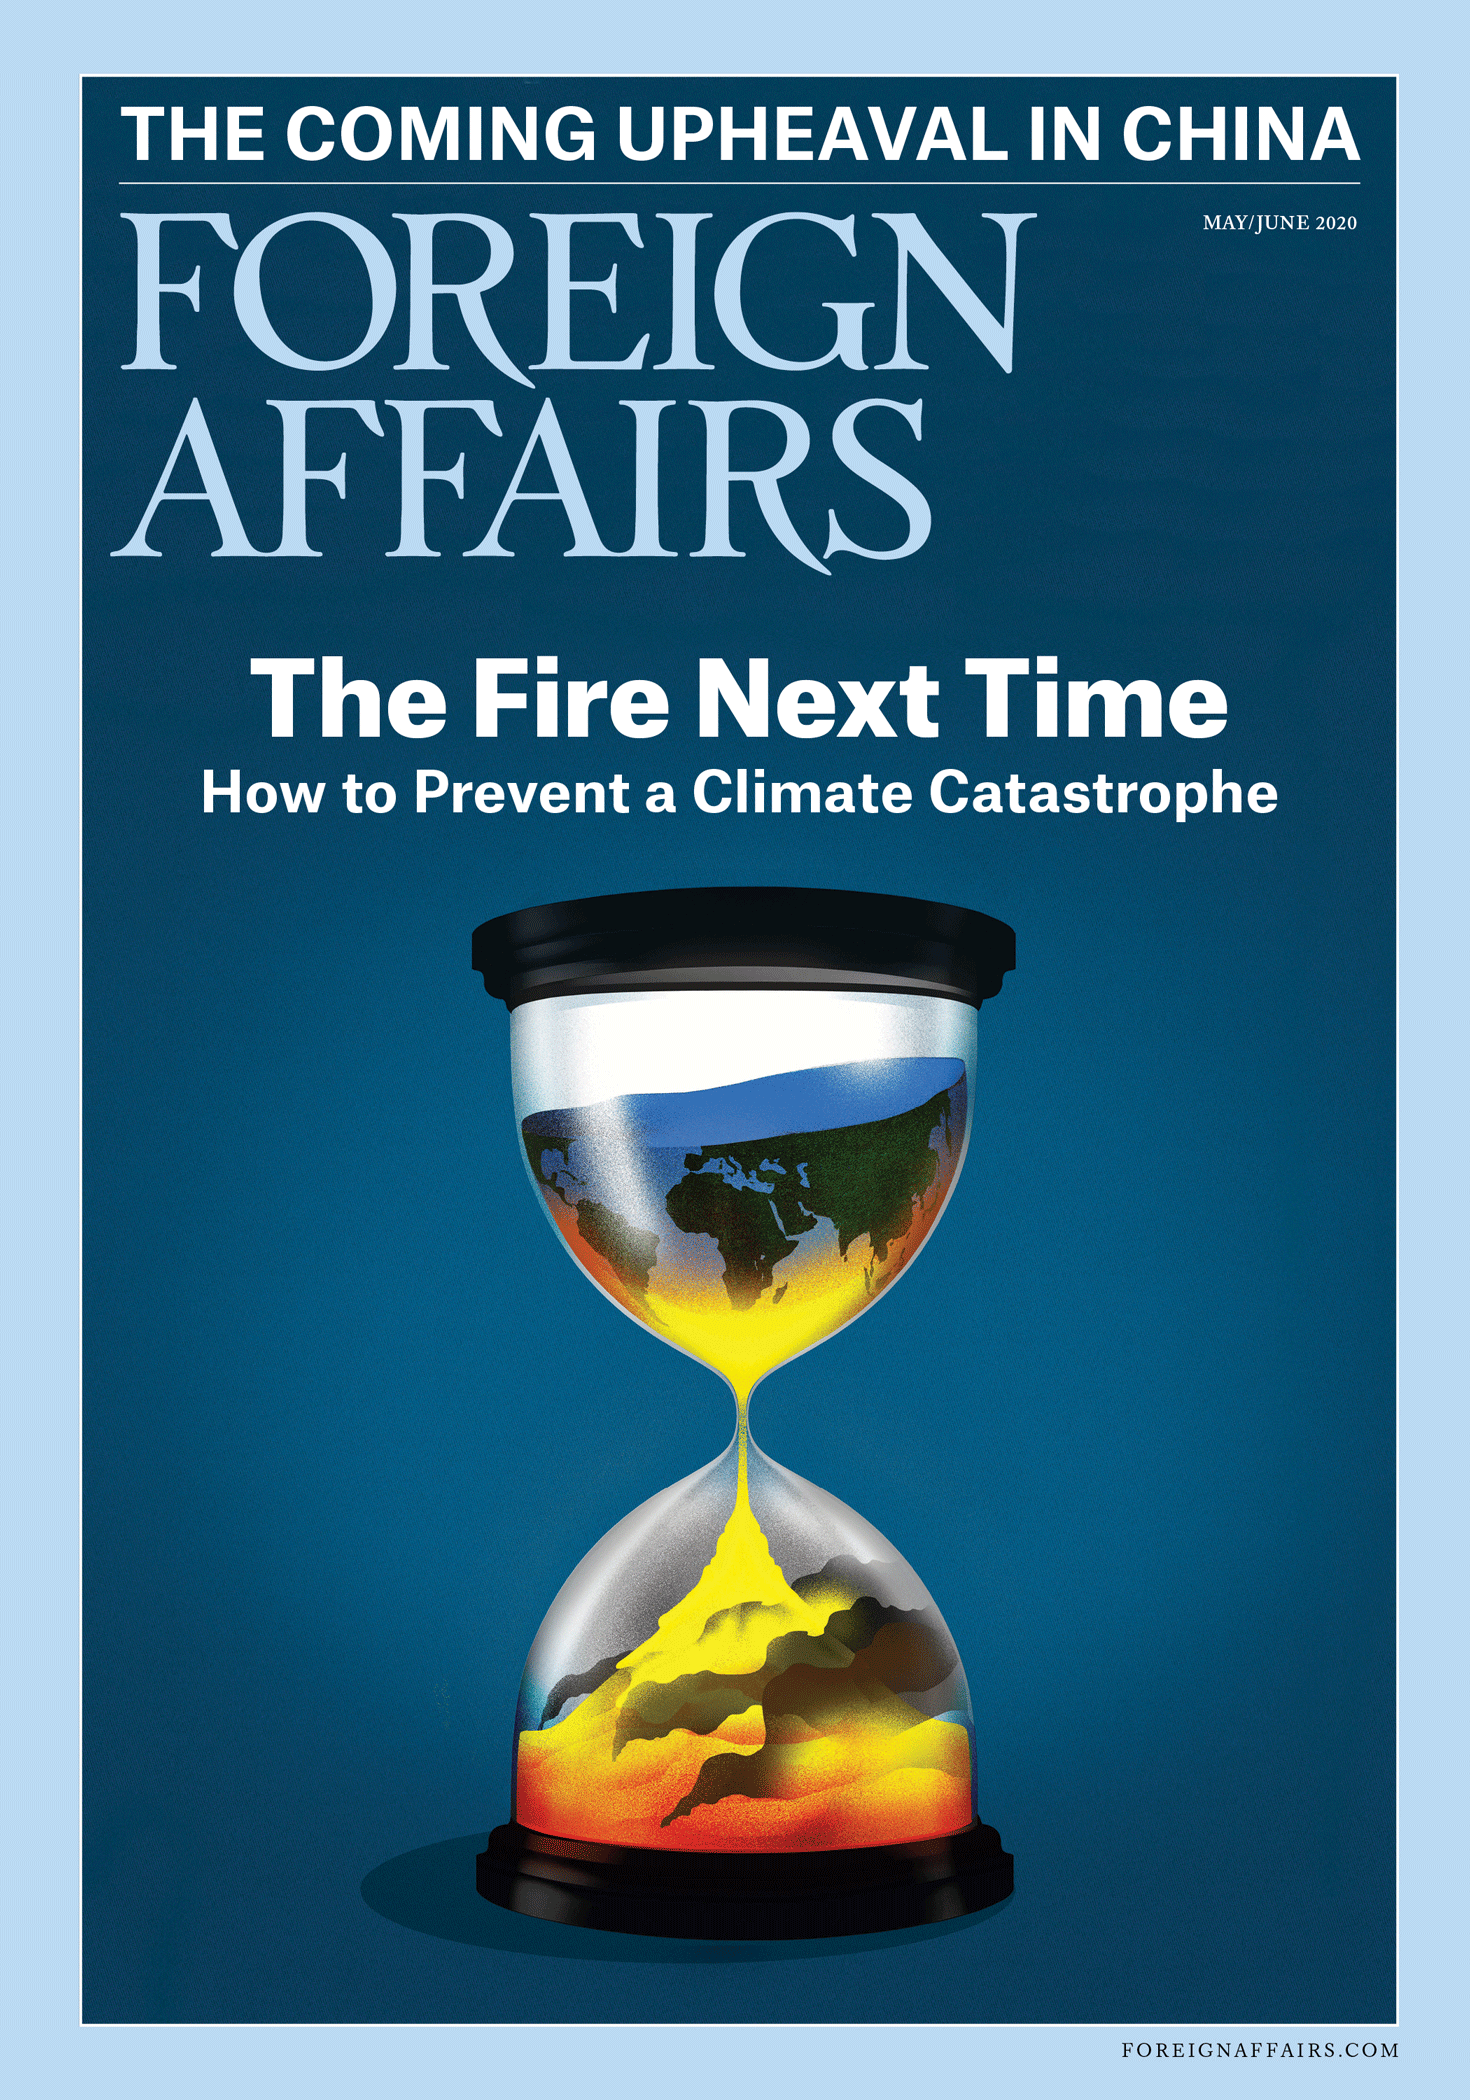 Foreign Affairs Magazine Subscription Discount Political and Economic  Insights